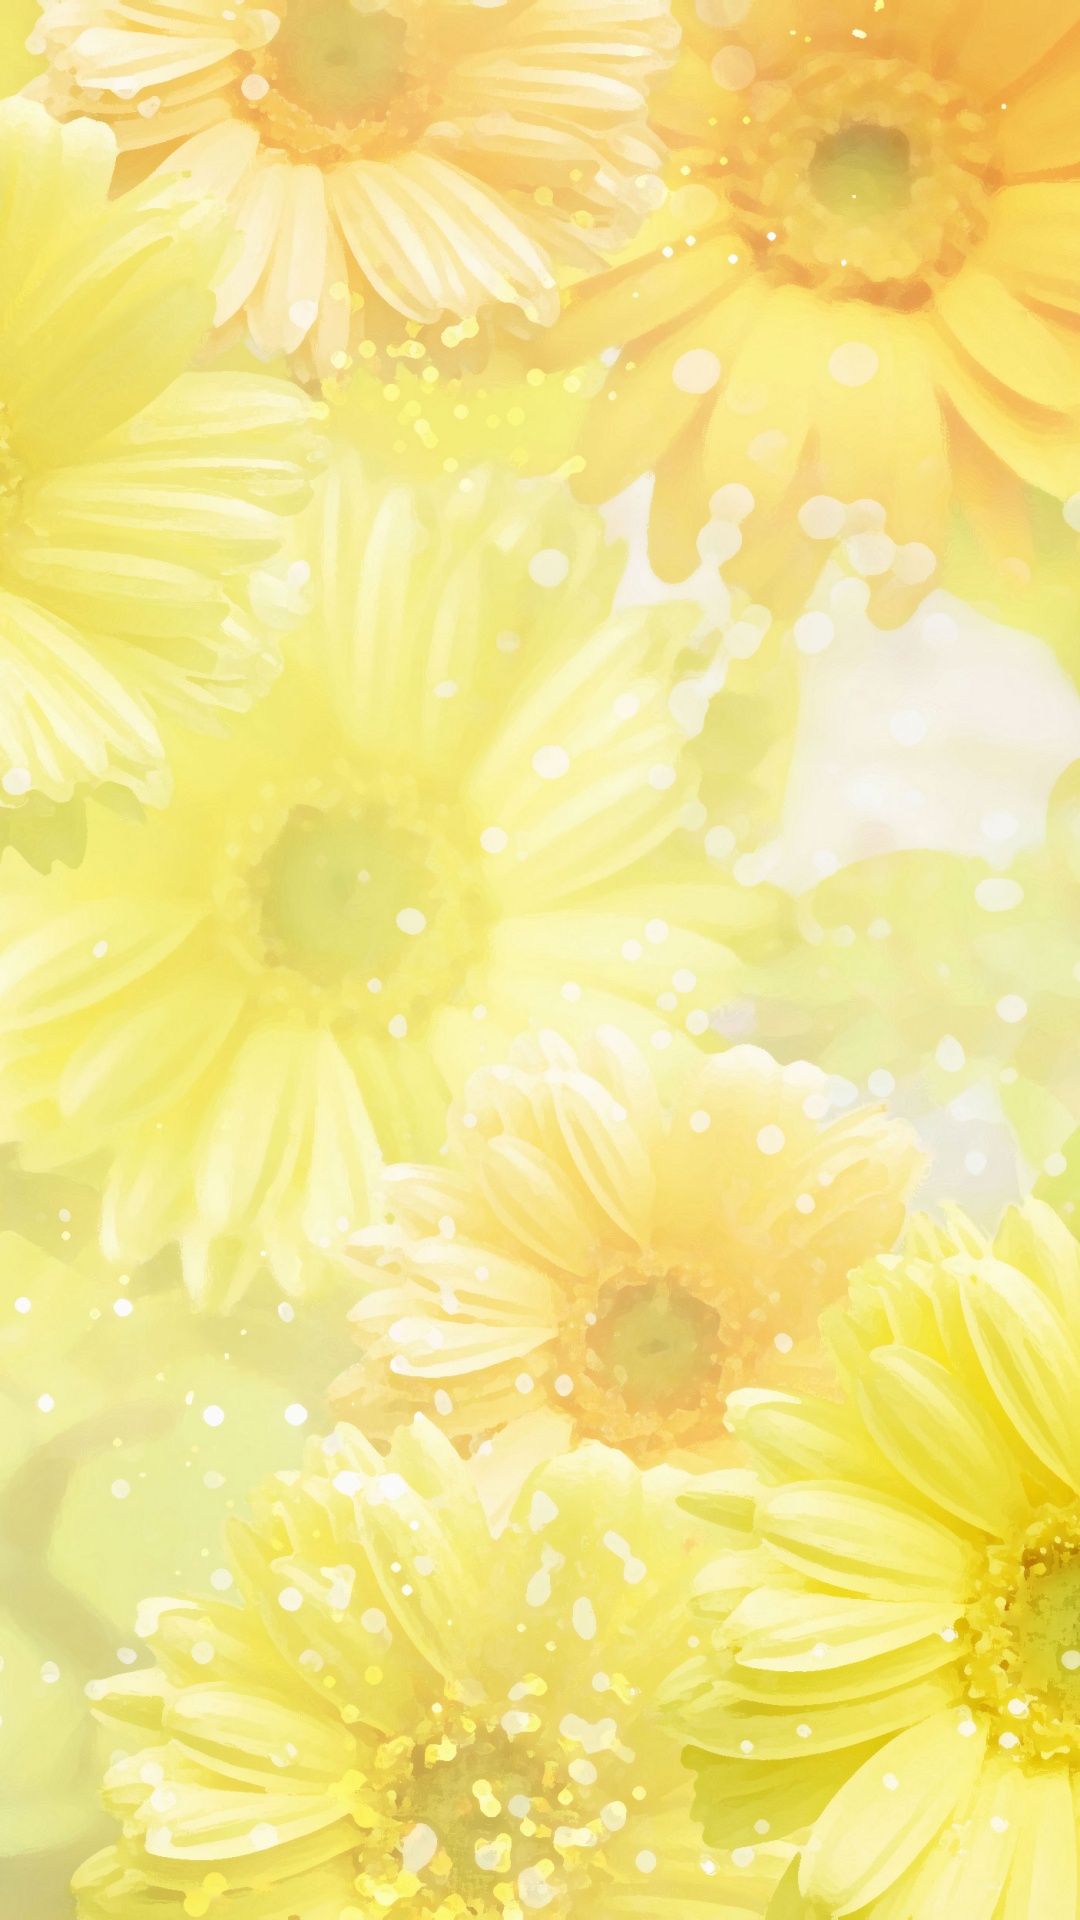 Yellow and White Daisy Flower. Wallpaper in 1080x1920 Resolution